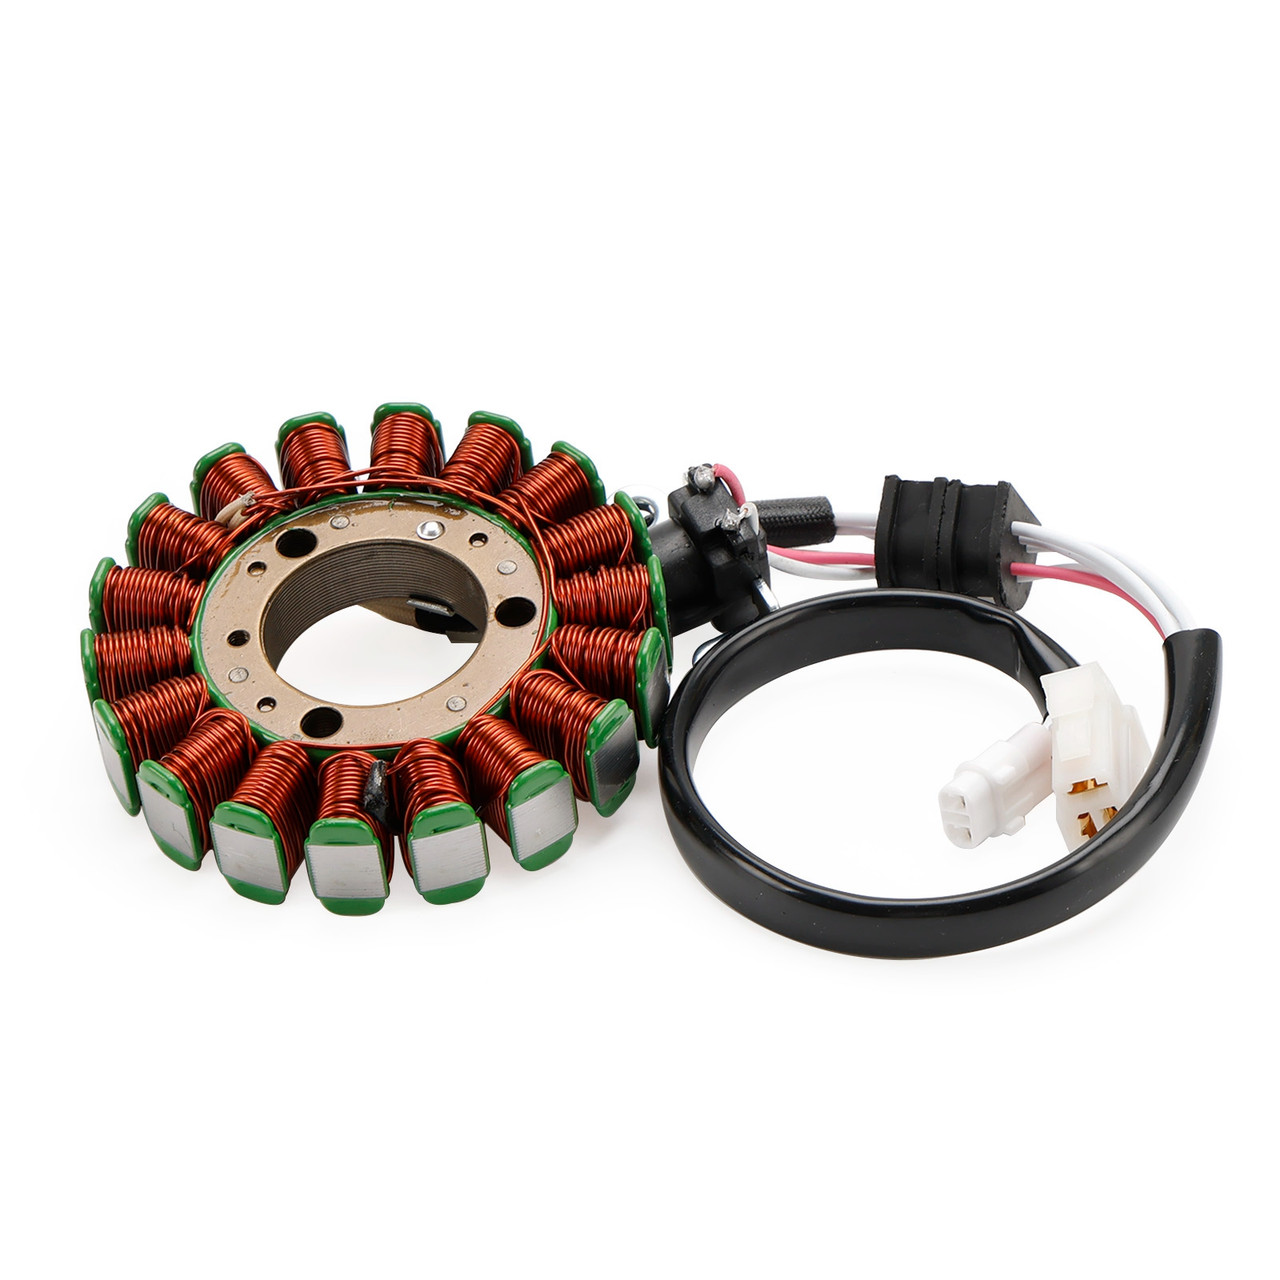 Magneto Stator + Voltage Rectifier + Gasket For Yamaha YZF-R 125 YZF-R125 08-09